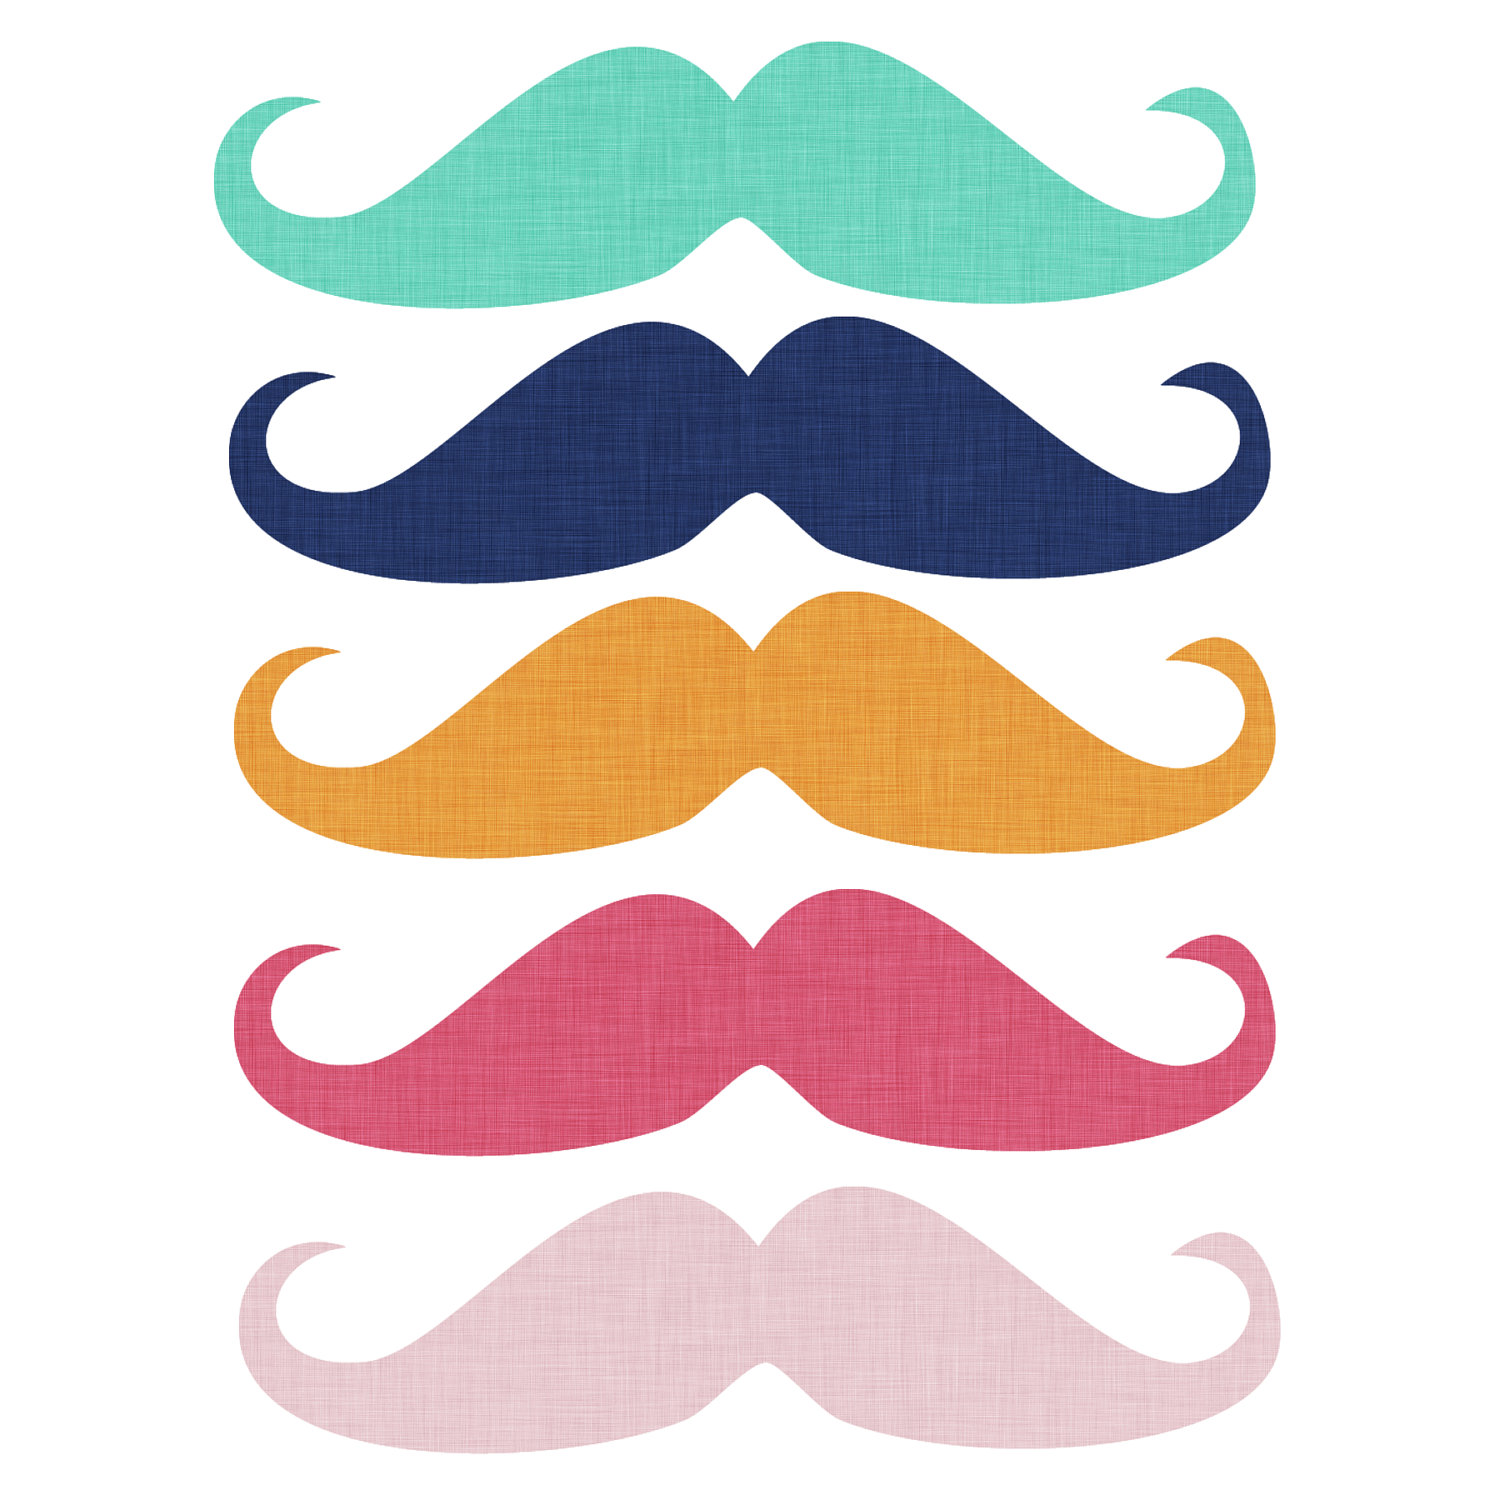 Mustache Clip Art to Download - dbclipart.com